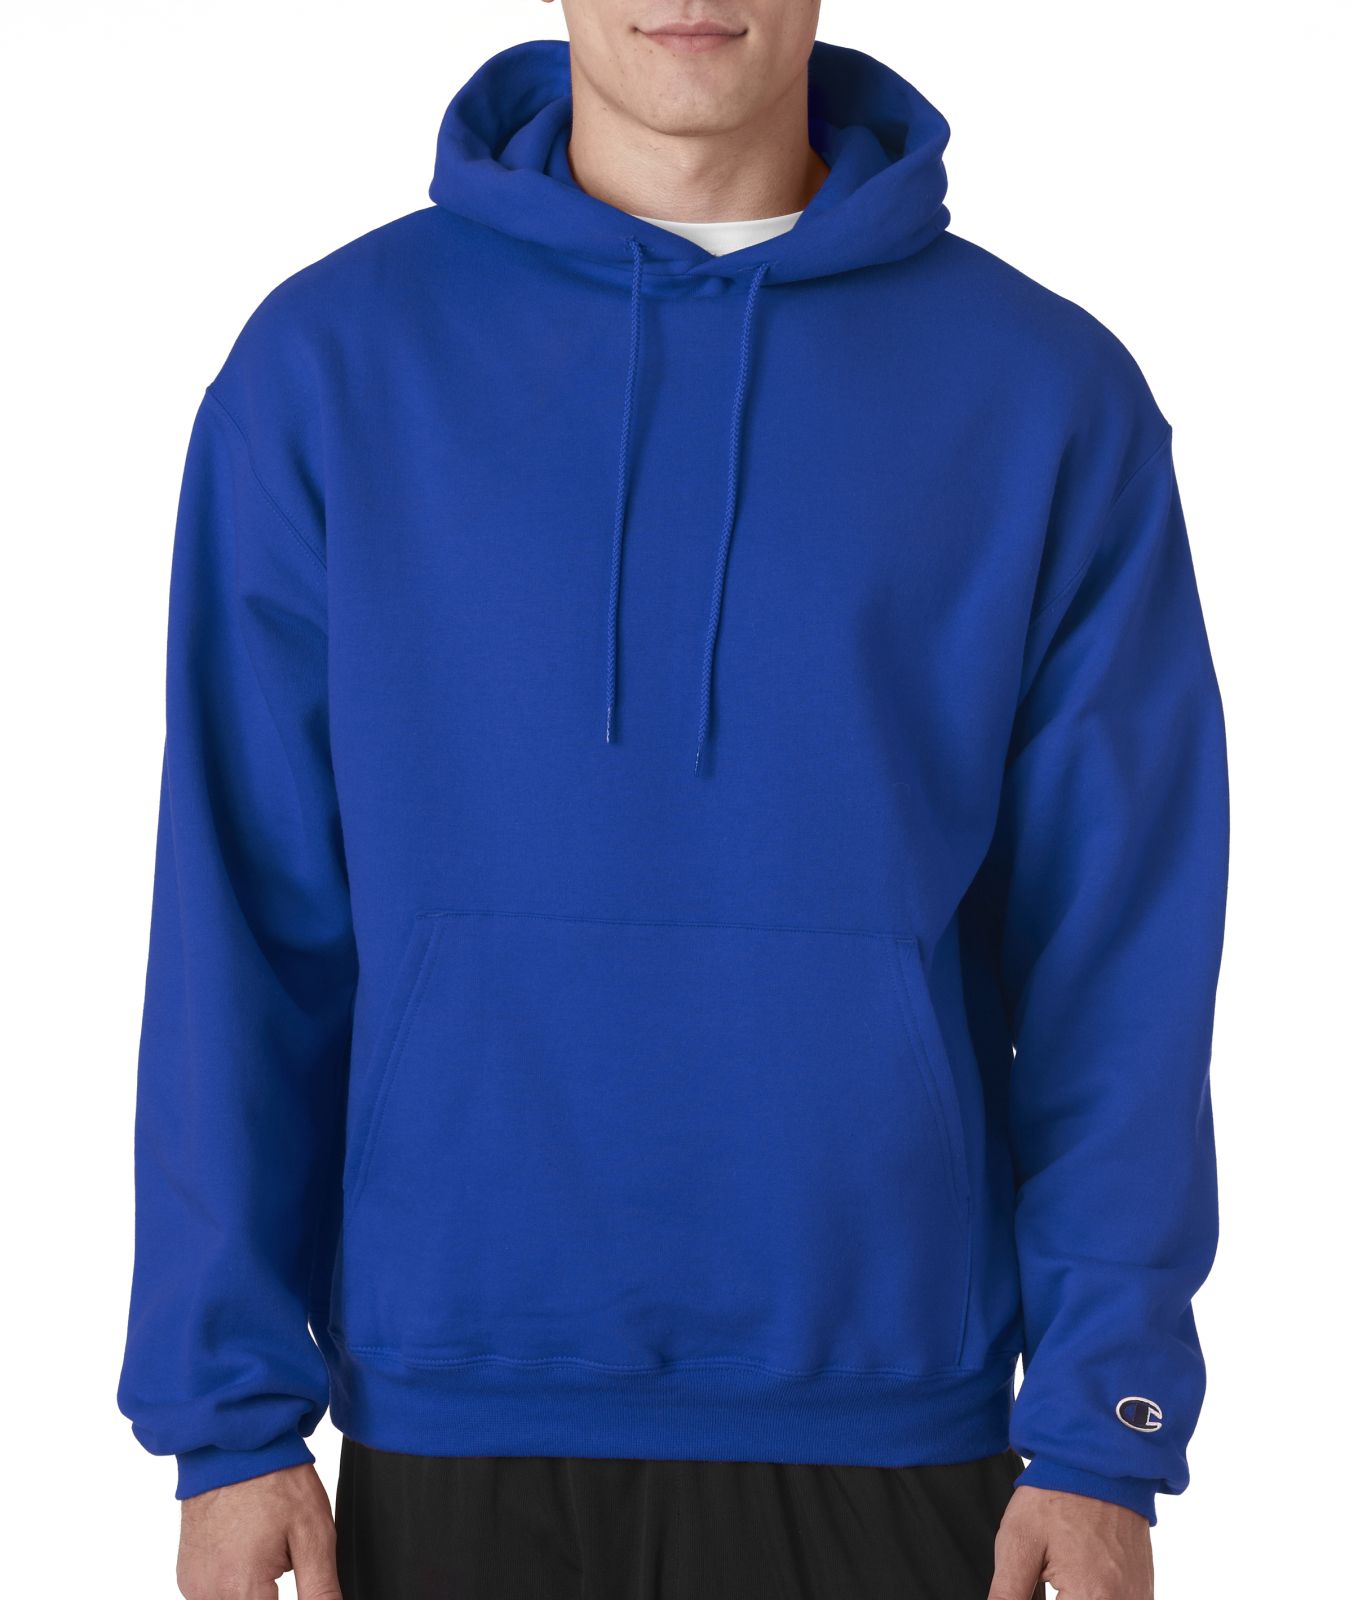 Champion S700 Adult Powerblend Pullover Hooded Sweatshirt, 52% OFF